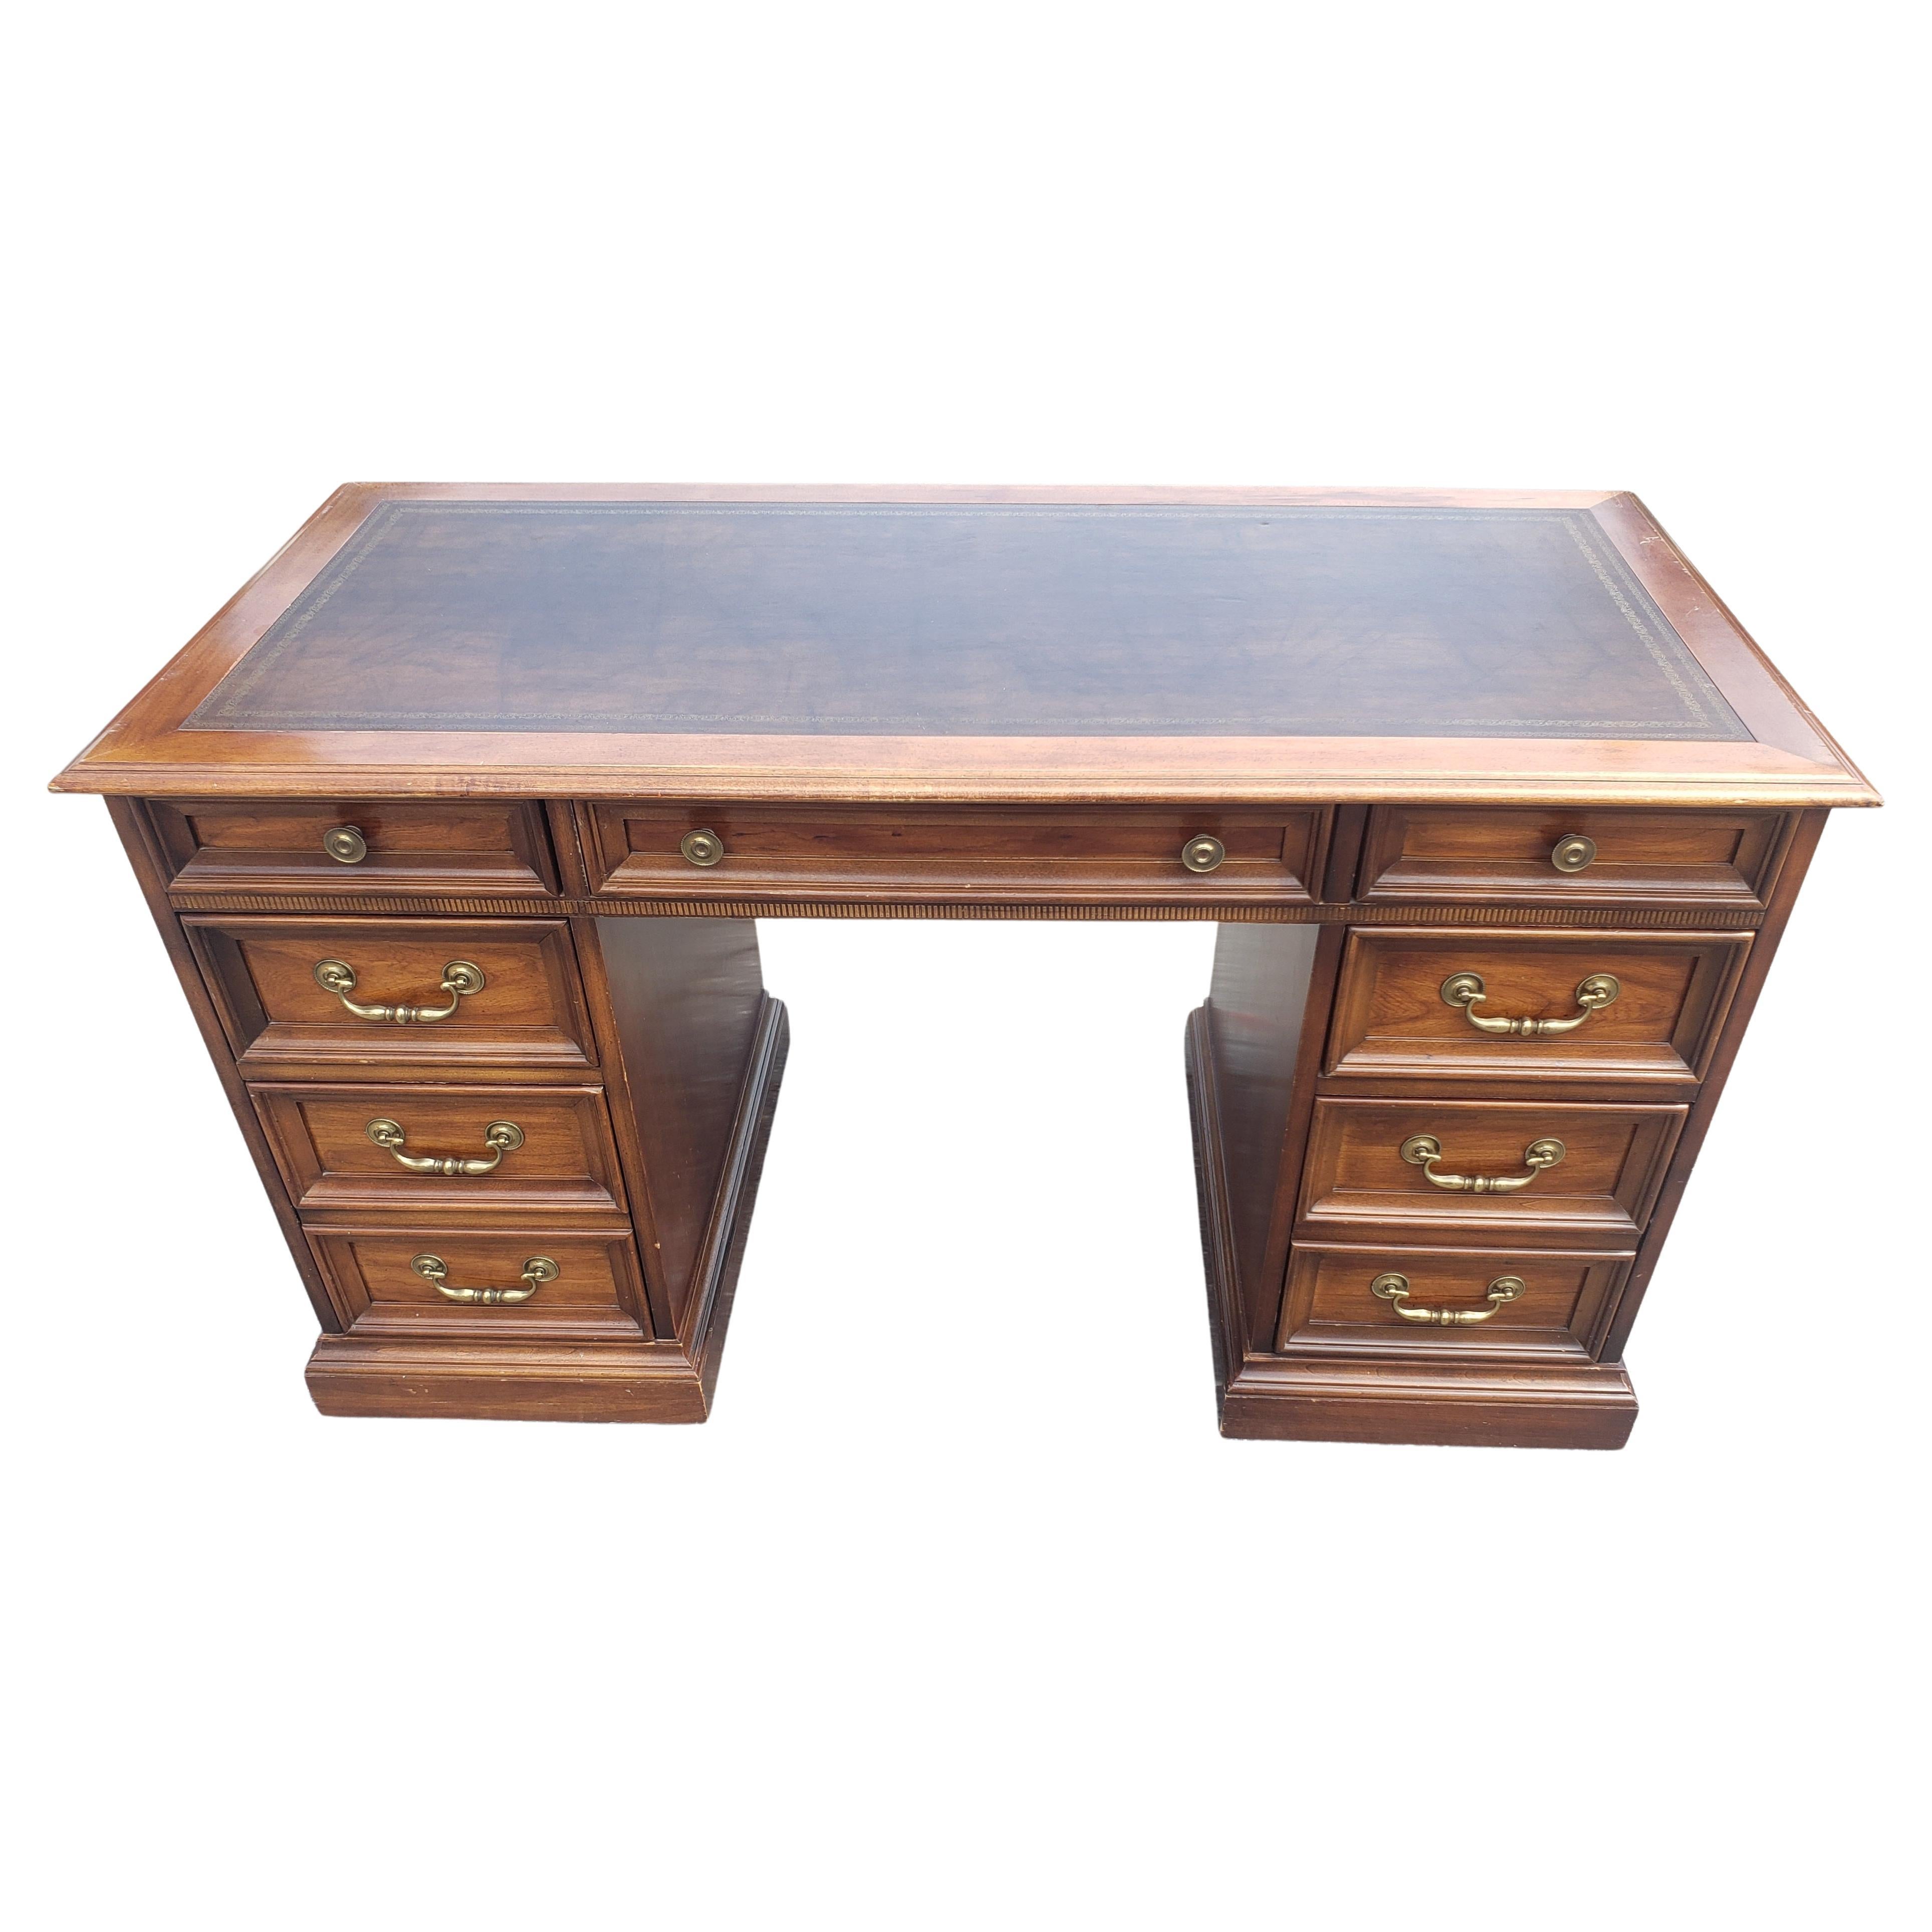 A National Mount Airy Chippendale Mahogany and Tooled Leather Partners Desk in great vintage condition. 
All drawers with dovetail construction and working flawlessly.